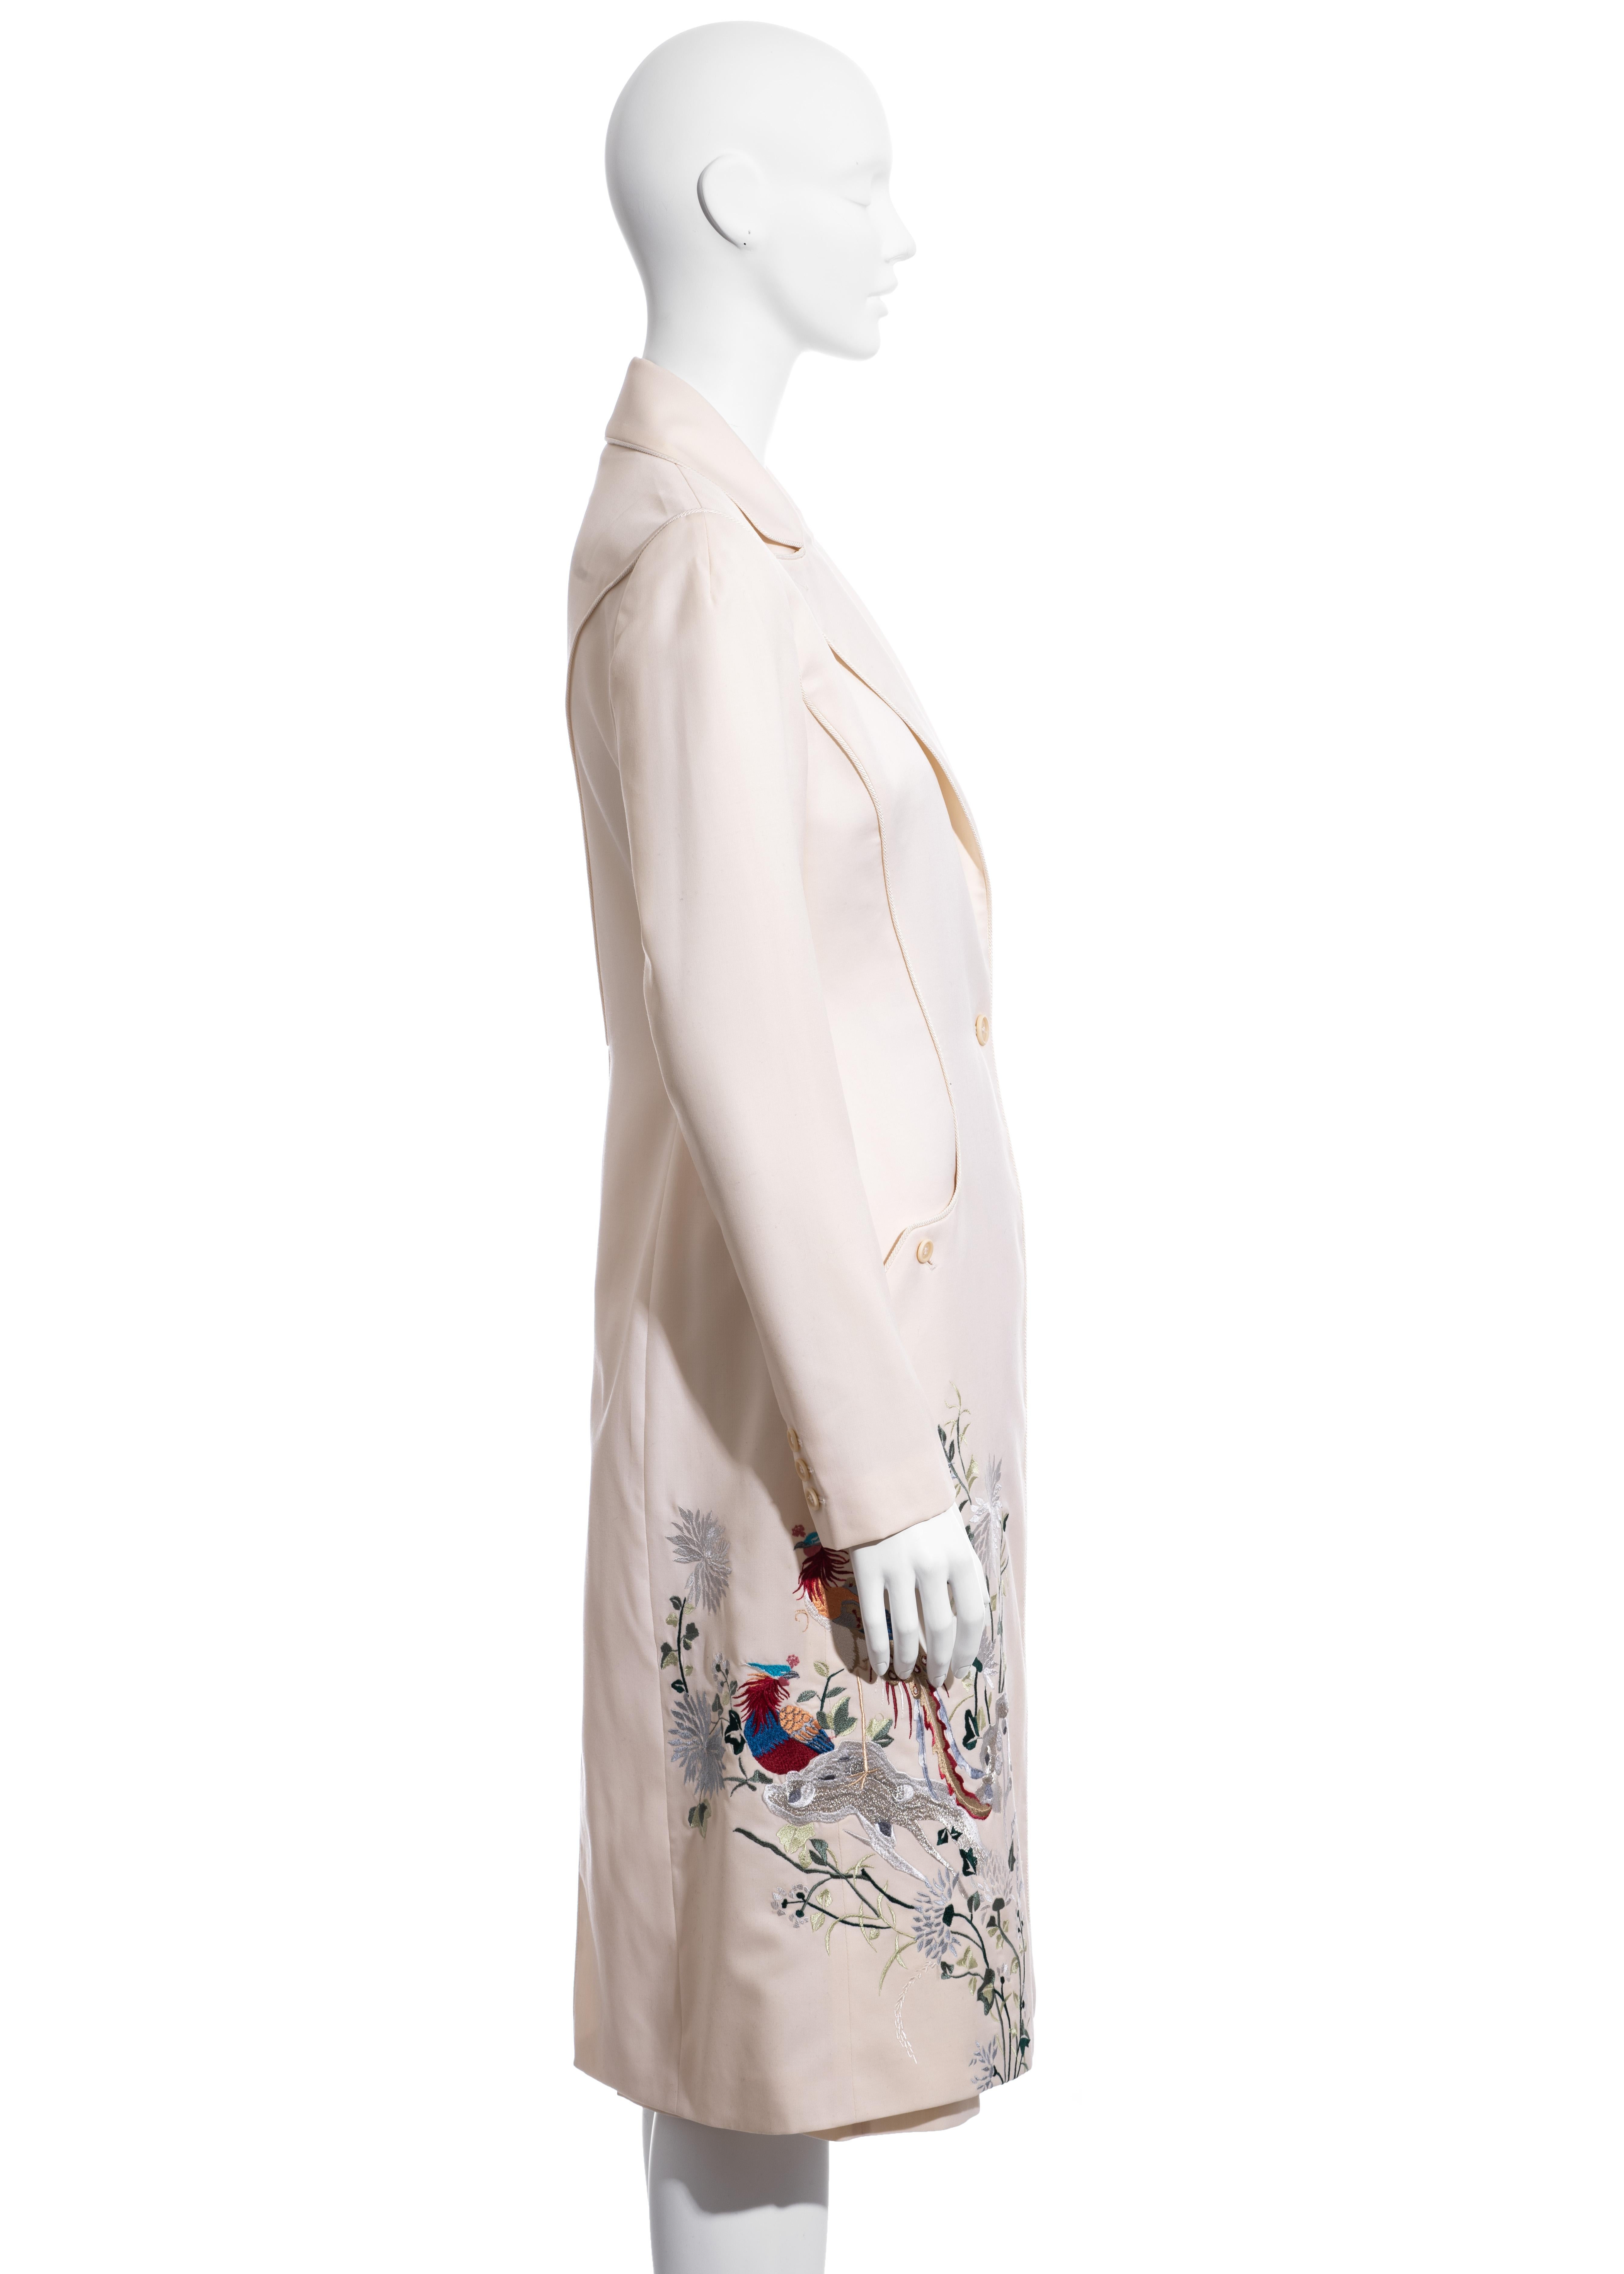 Beige Alexander McQueen ivory wool embroidered skirt suit, c. 1997-1999 For Sale